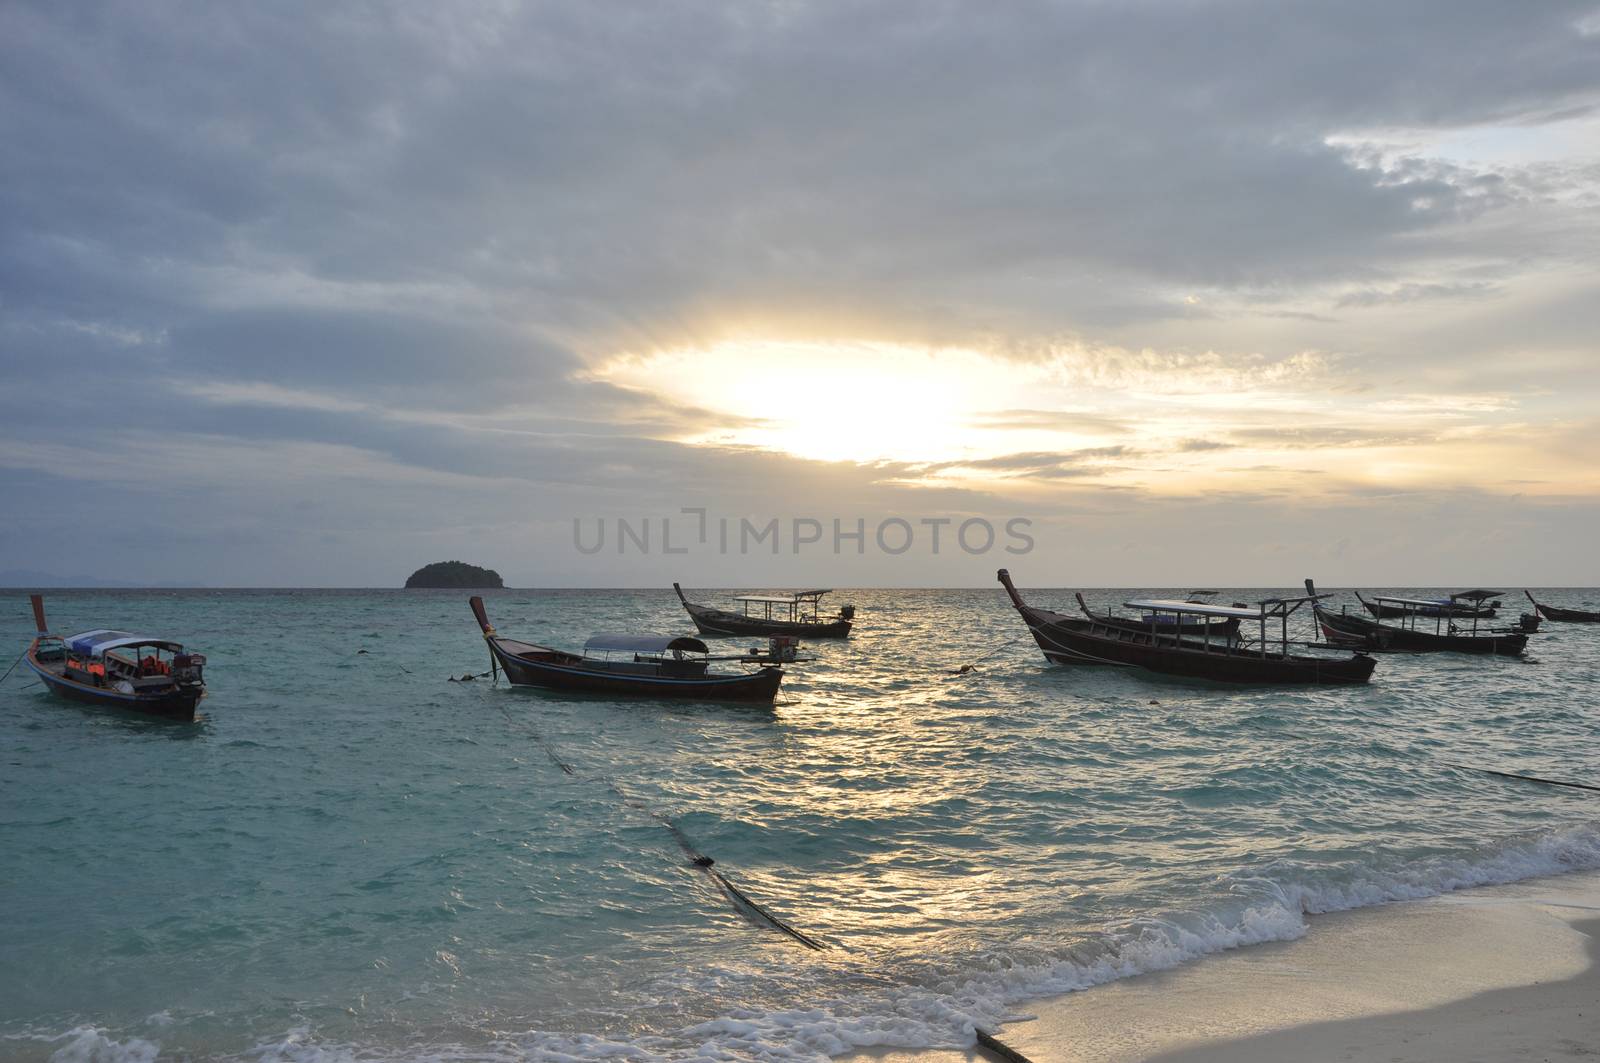 Boat in the sea with sunrise background by ngarare